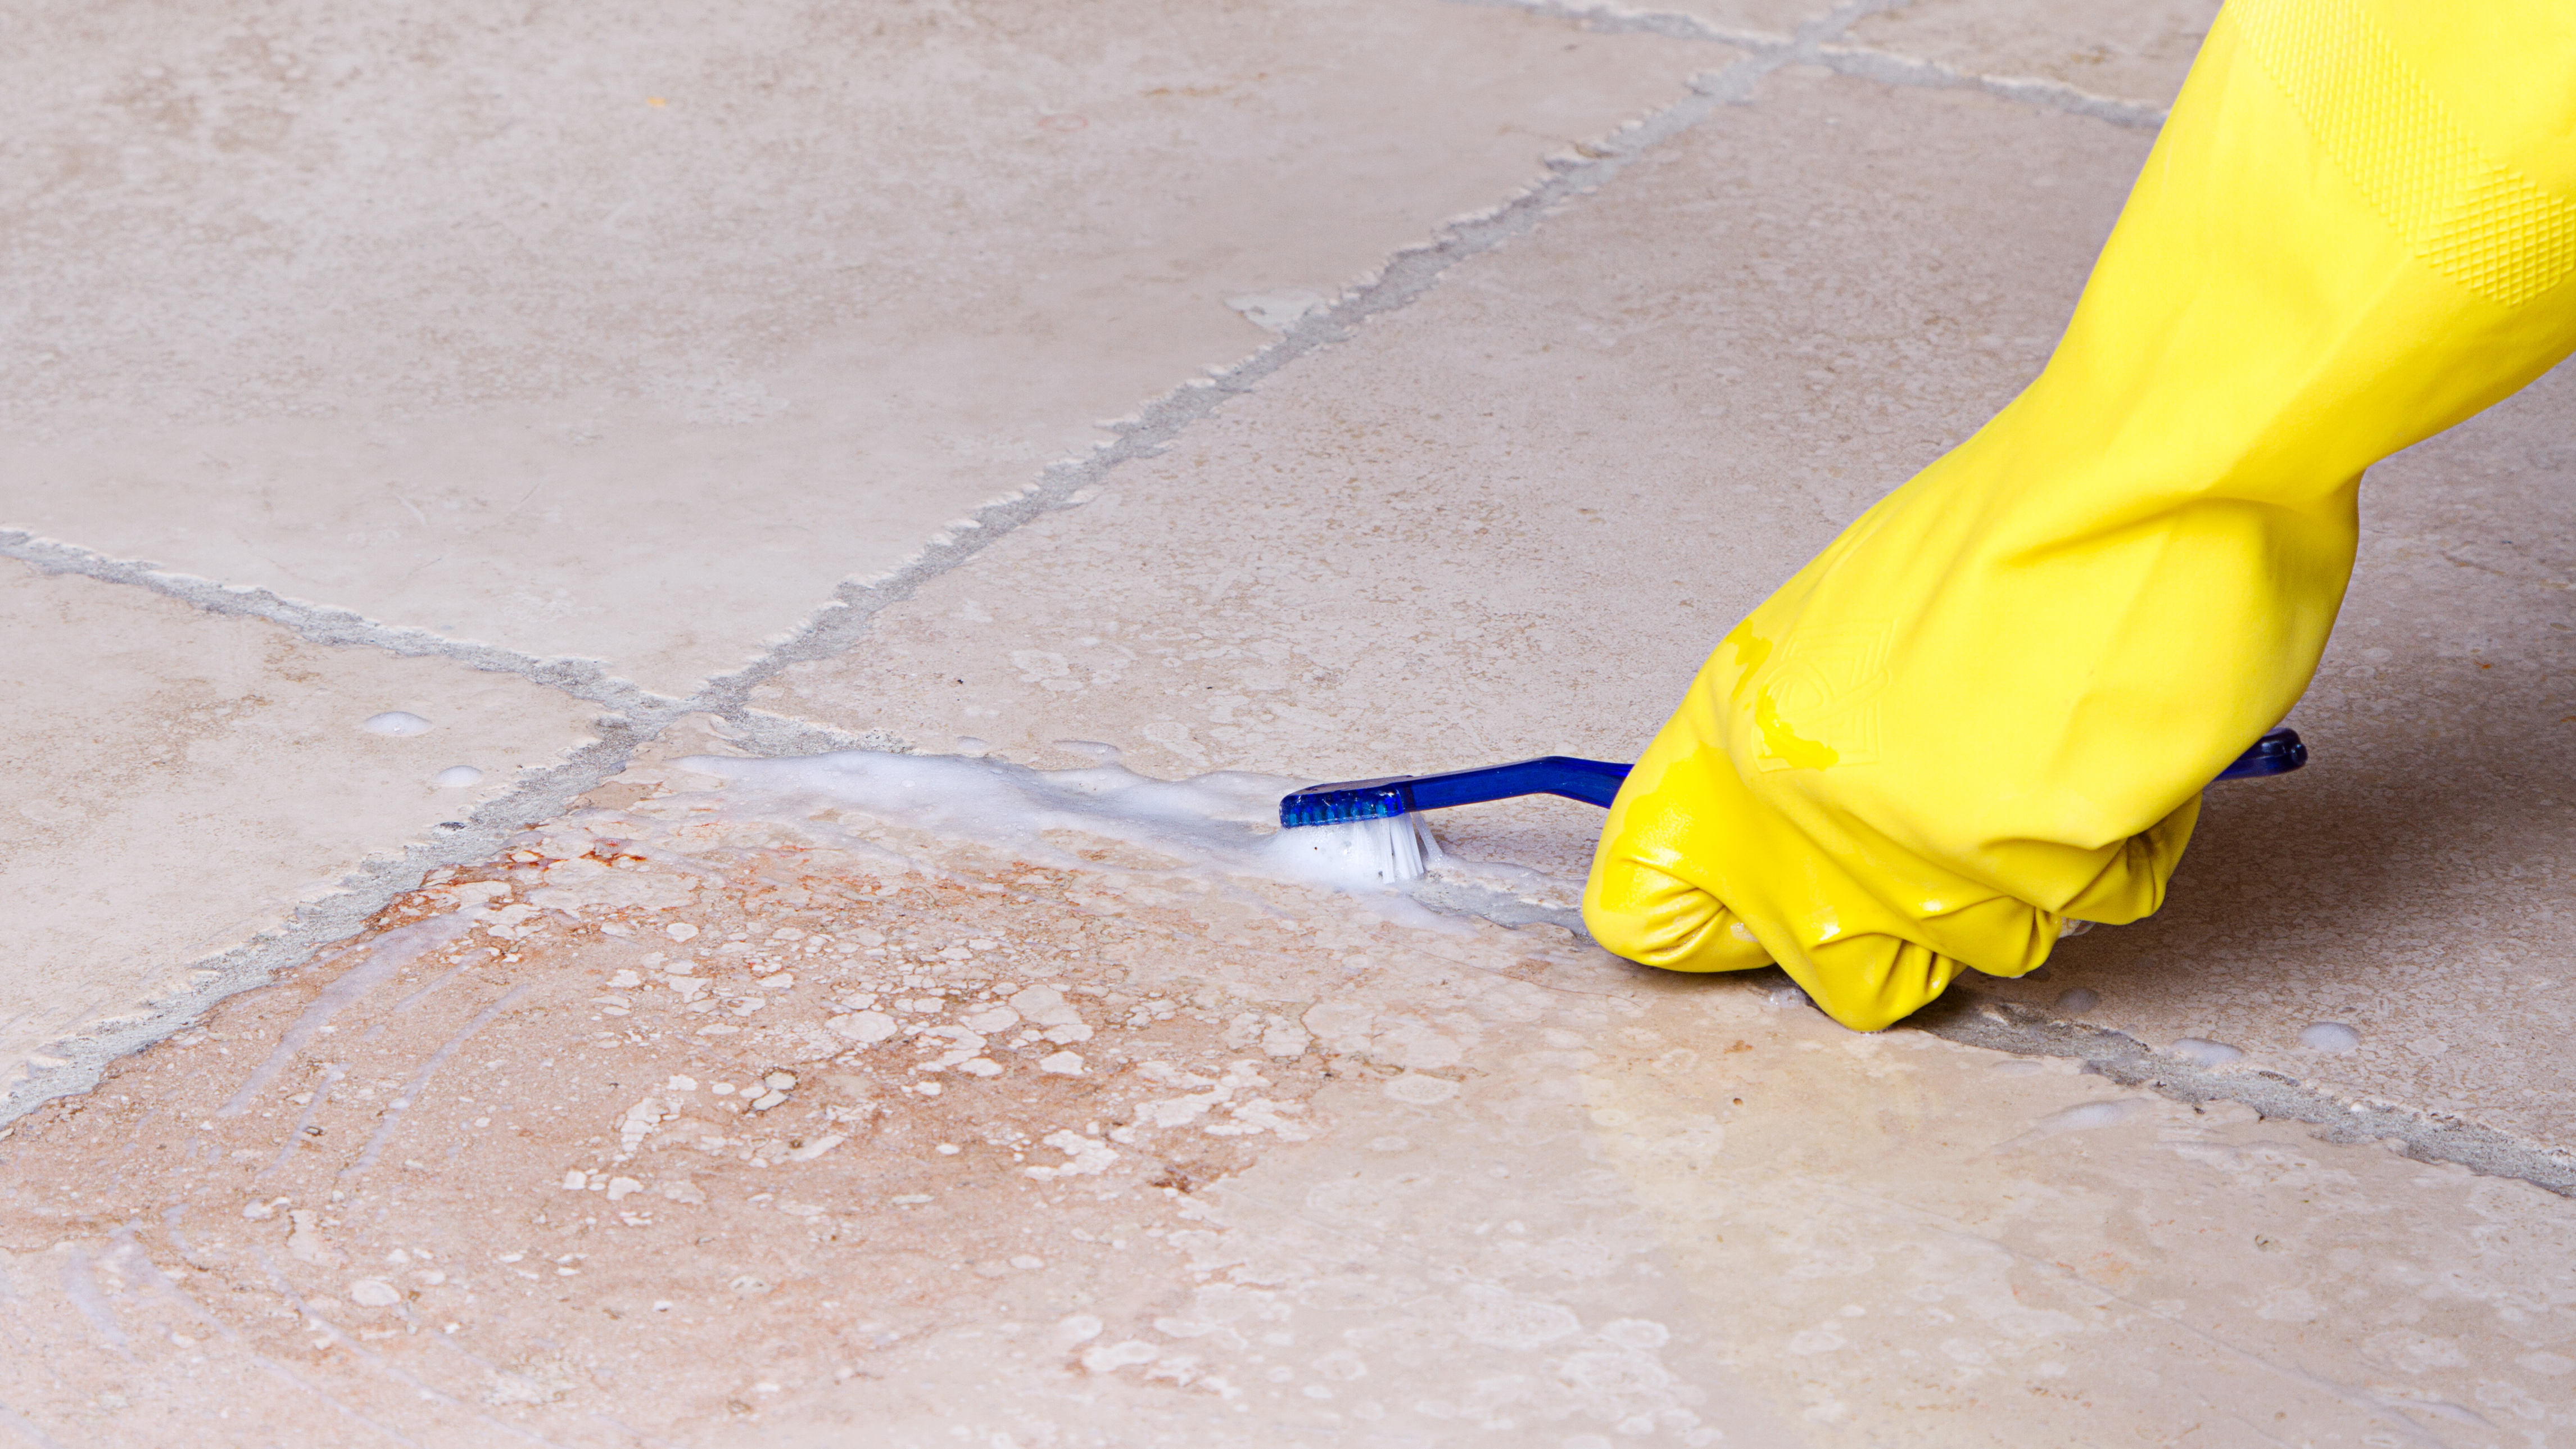 How To Clean Grout On Floor Tiles, Cleaning Old Ceramic Tile Floors